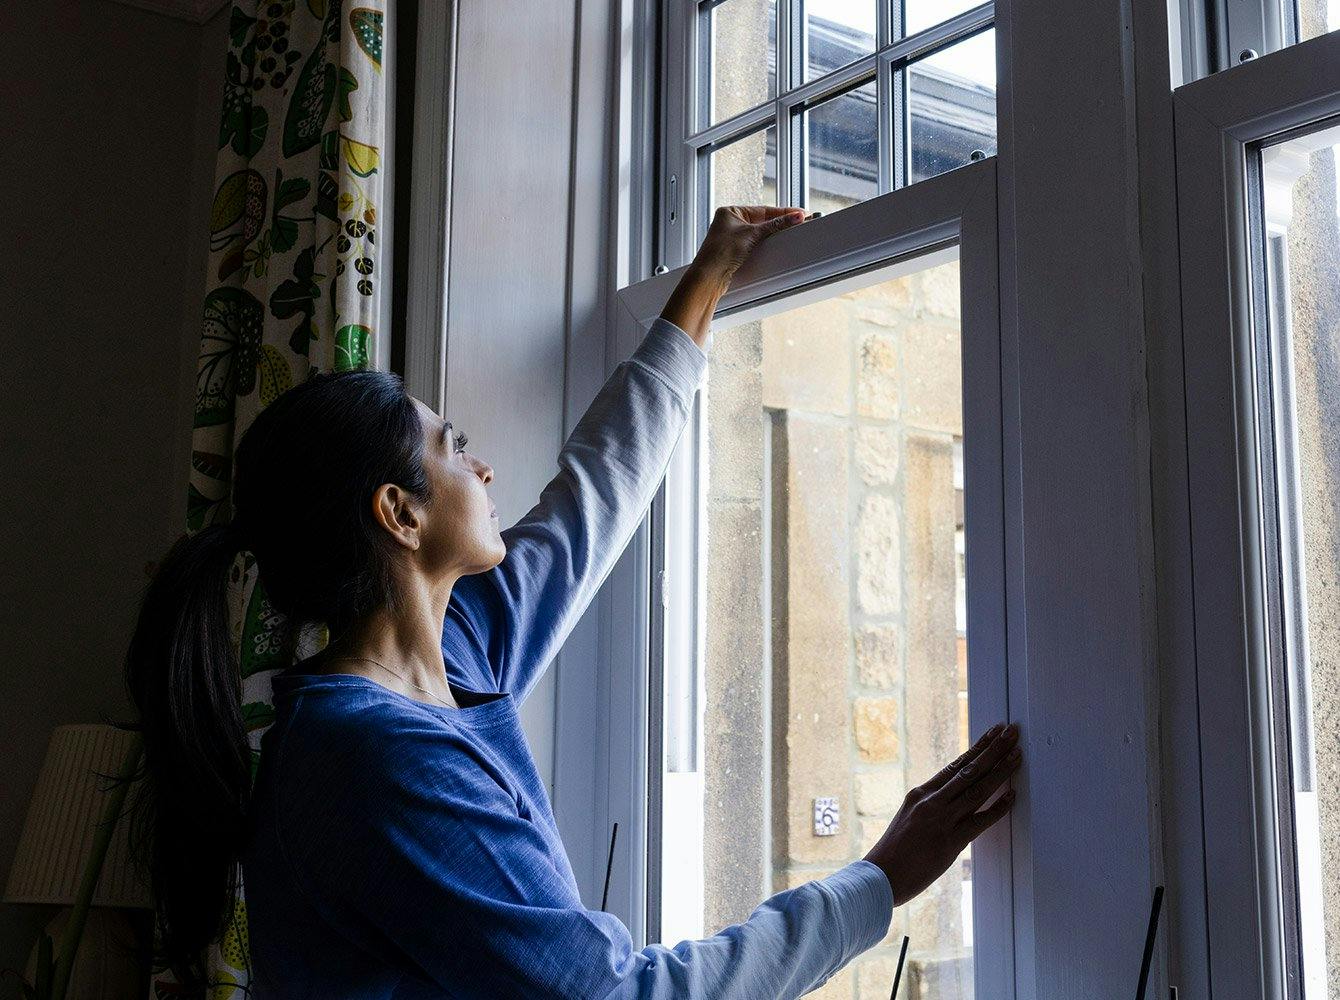 A woman reaching up to unlock a window in a house